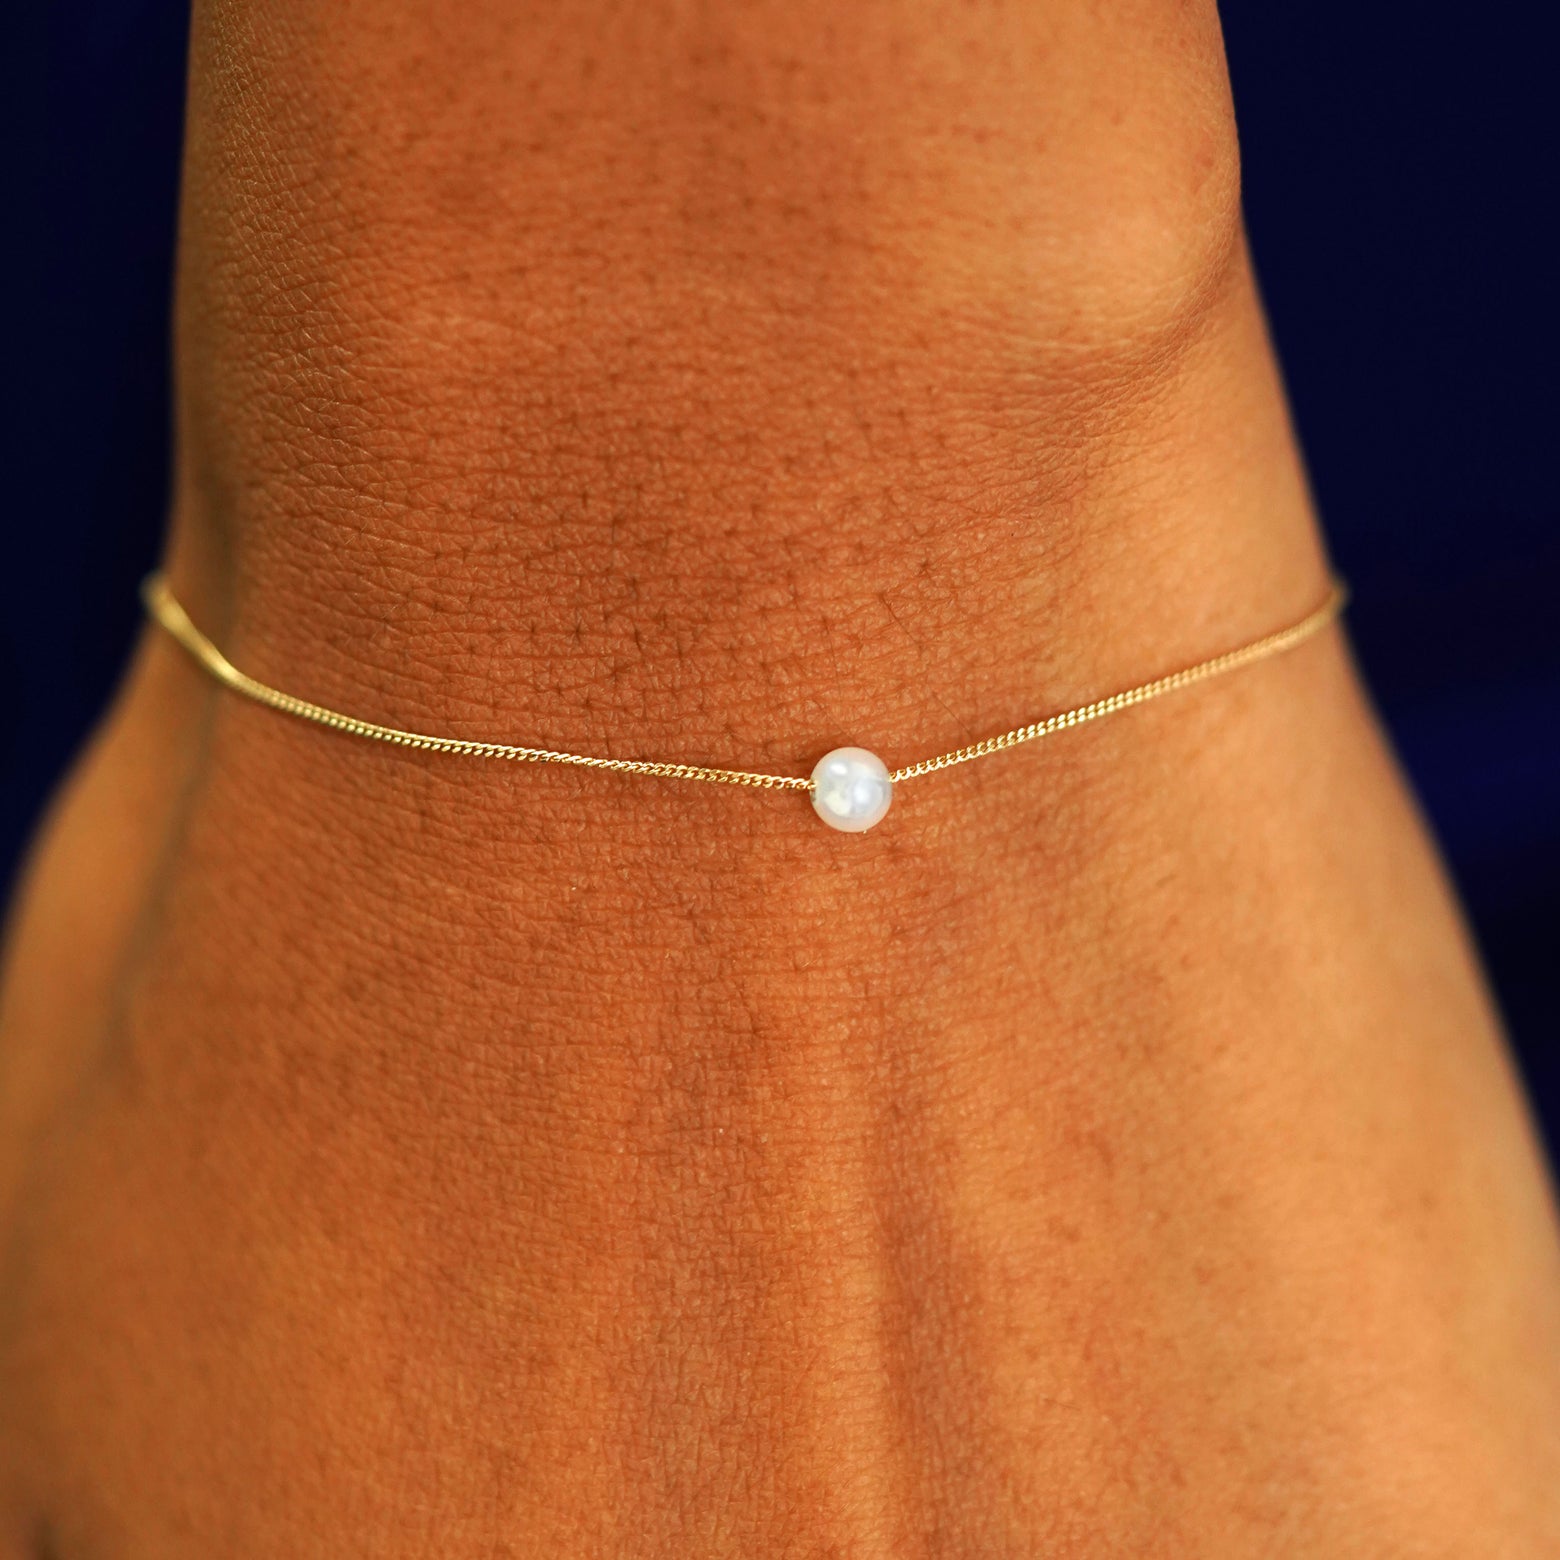 A model's wrist wearing a yellow gold Pearl Slide Bracelet with a 4mm pearl